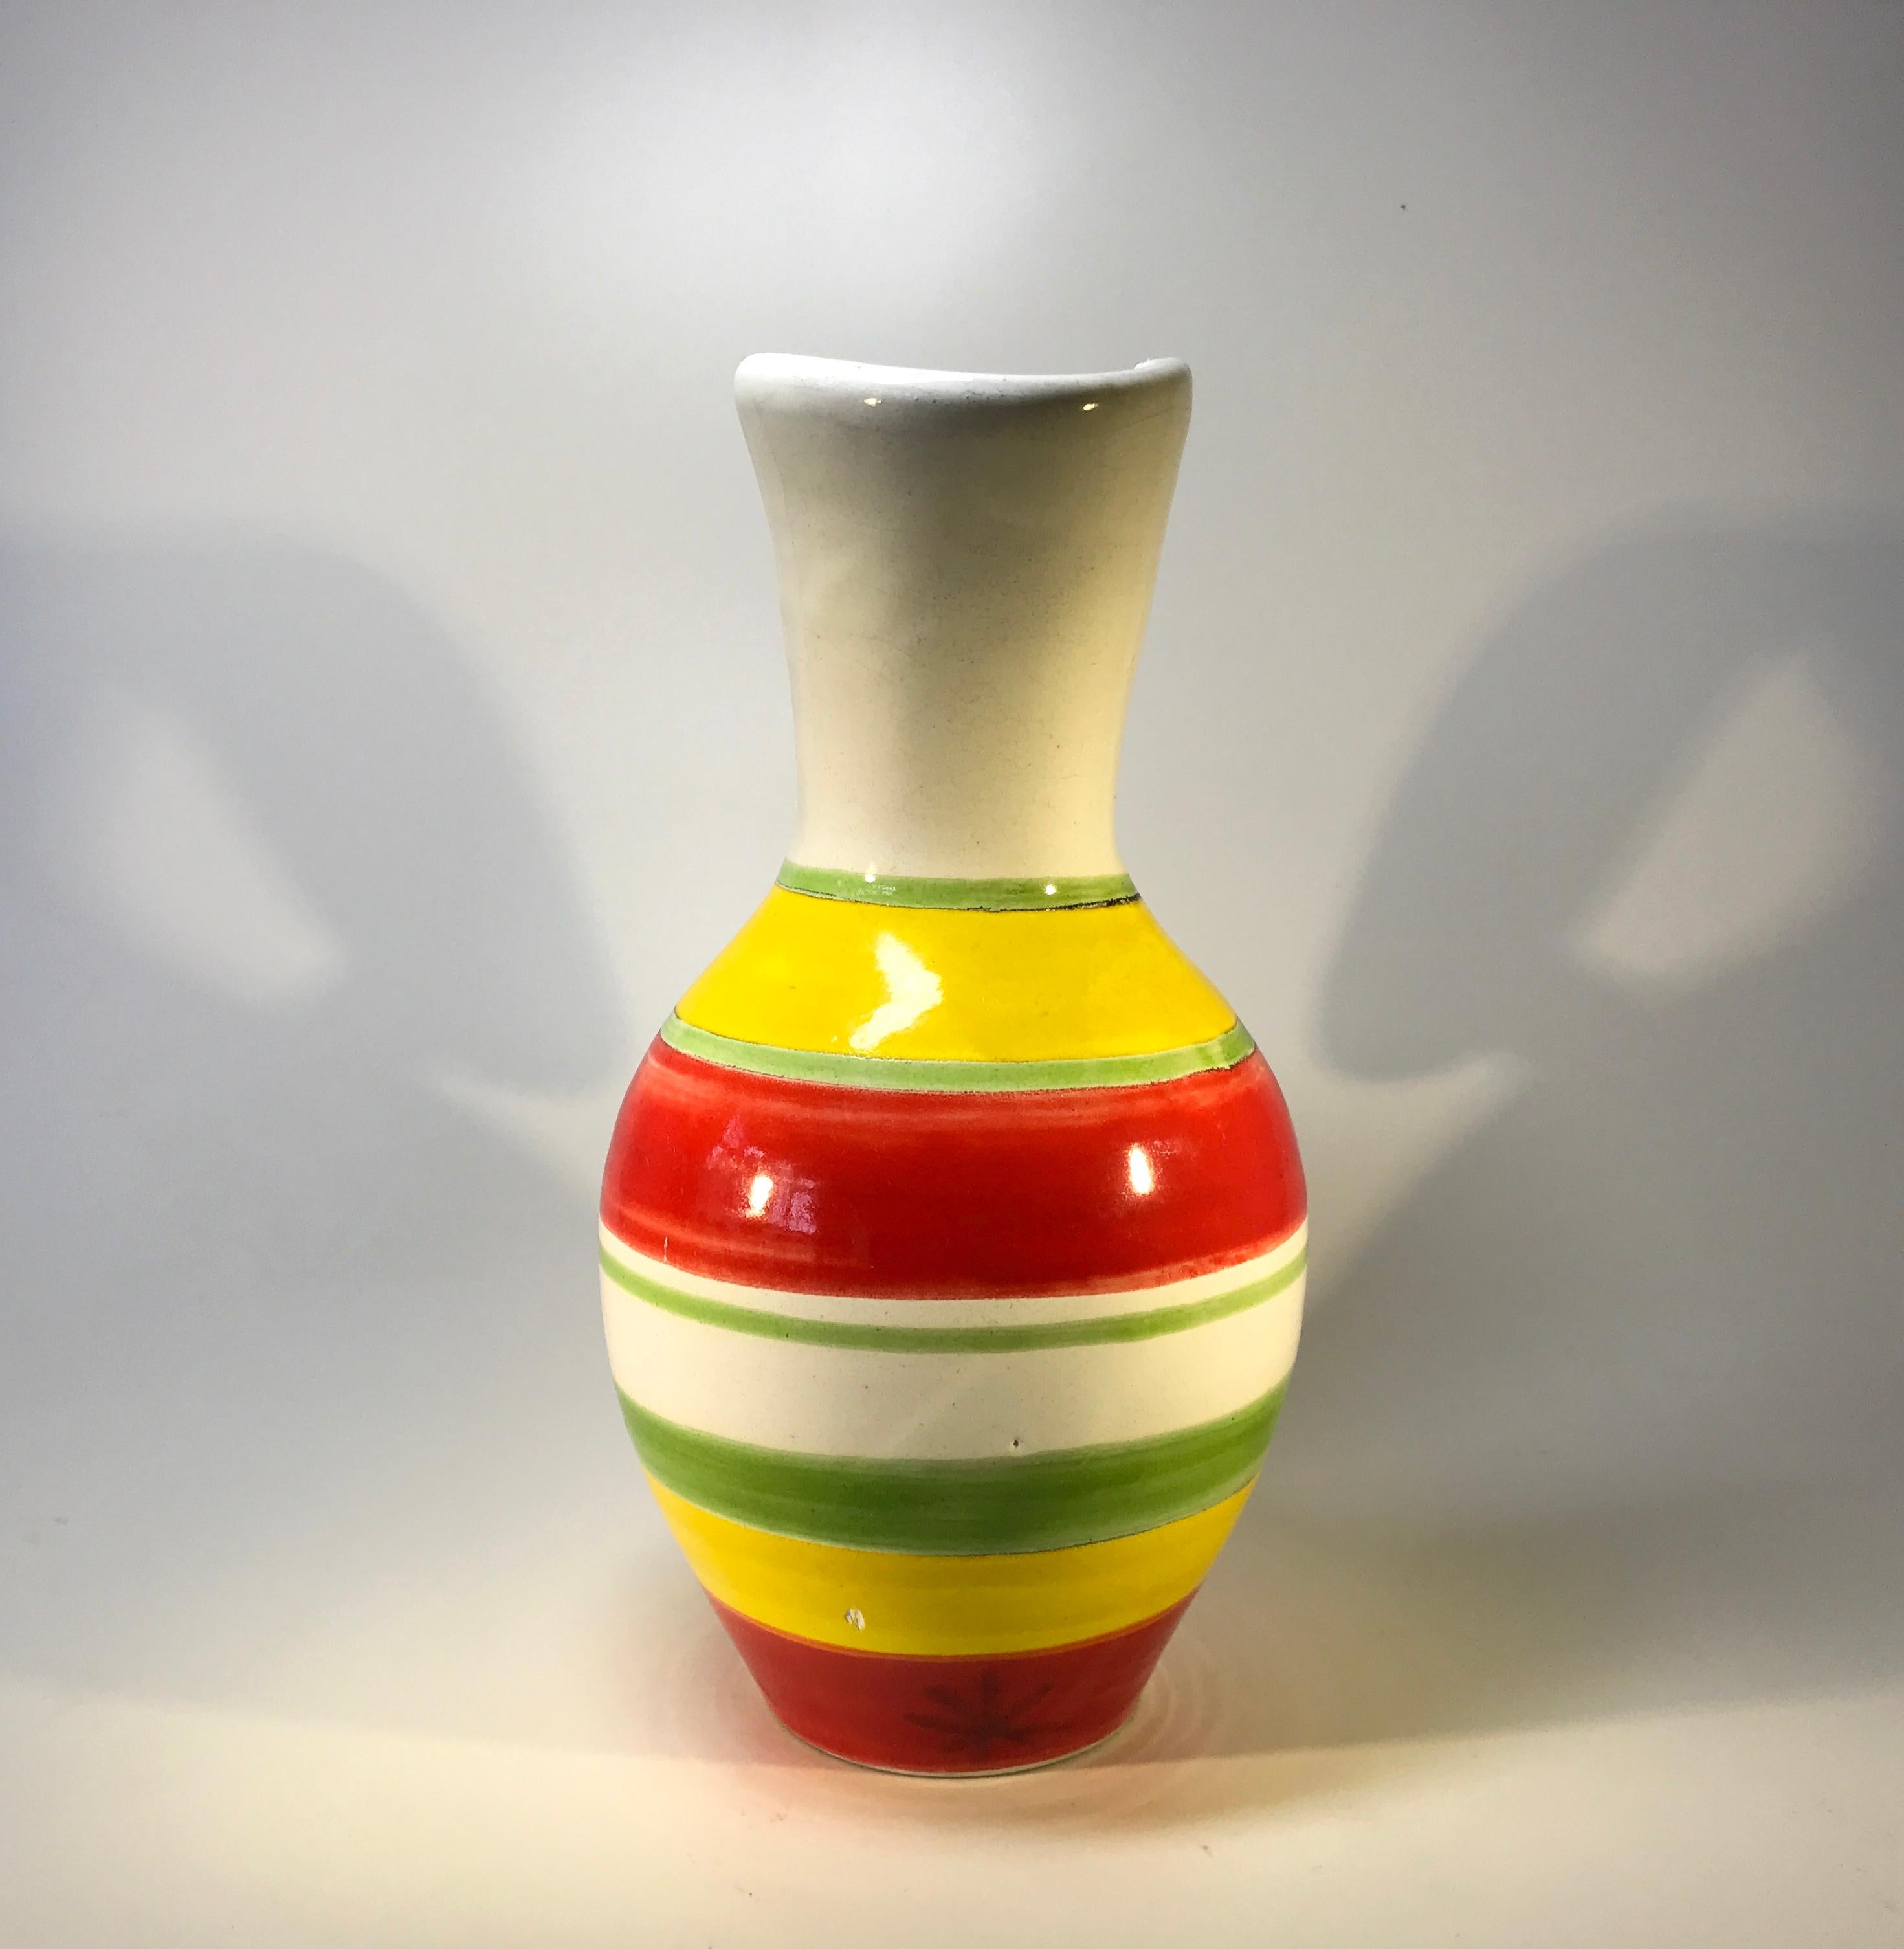 DeSimone of Italy, tall ceramic pitcher hand decorated with brightly coloured red, yellow and green stripes
Intriguing neck shape - an appealing, cheerful piece from DeSimone,
Circa 1960's
Signed DeSimone, Italy
Measures: Height 9 inch, width